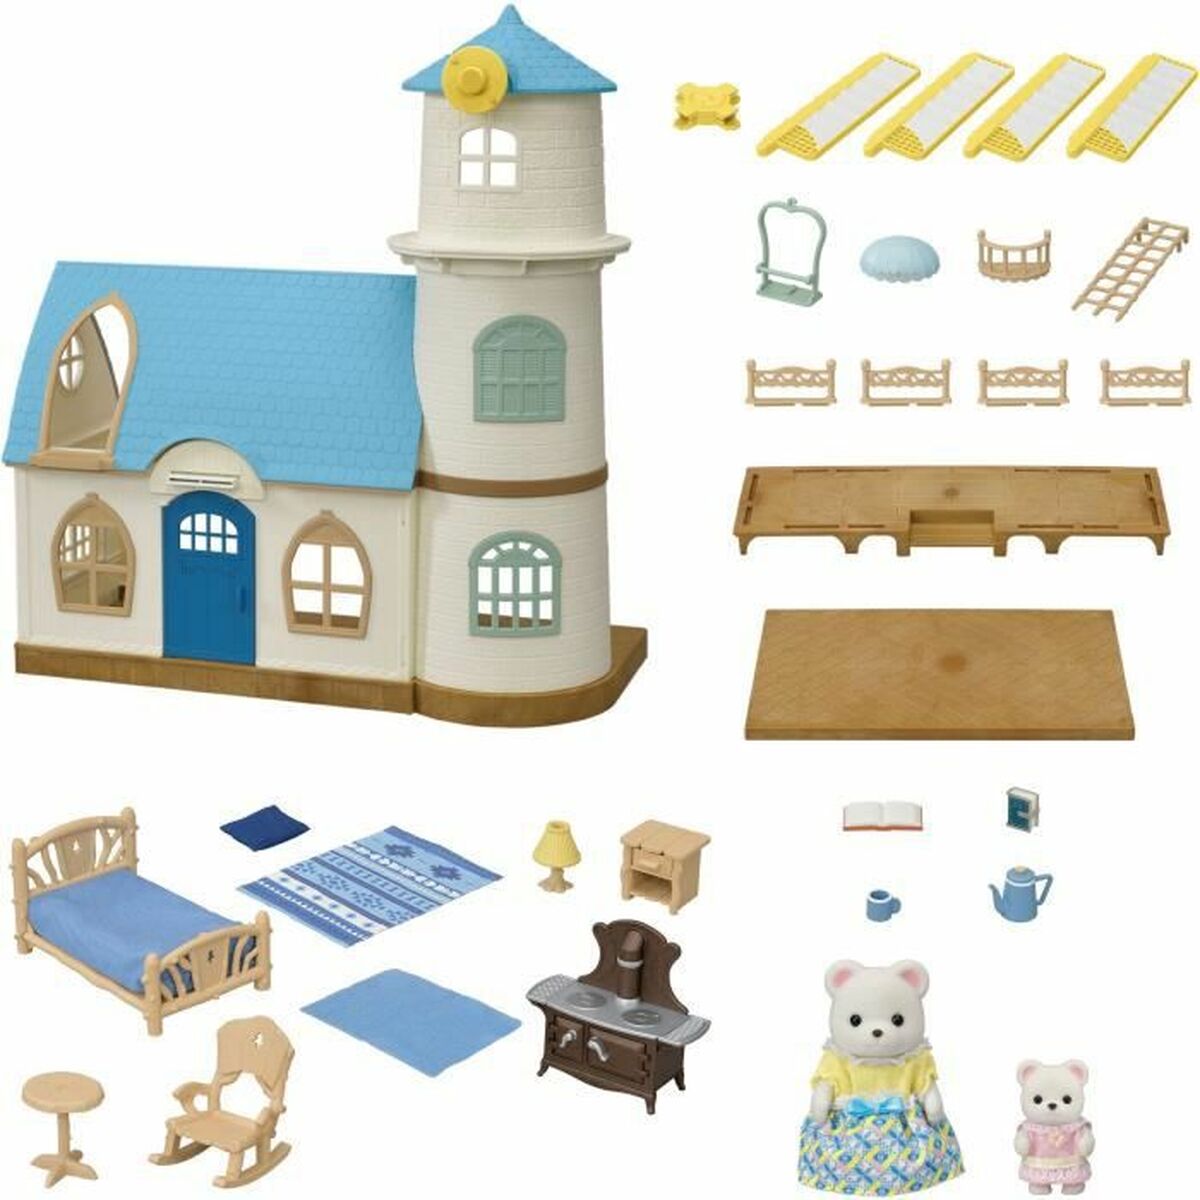 Doll's House Sylvanian Families The Big Windmill